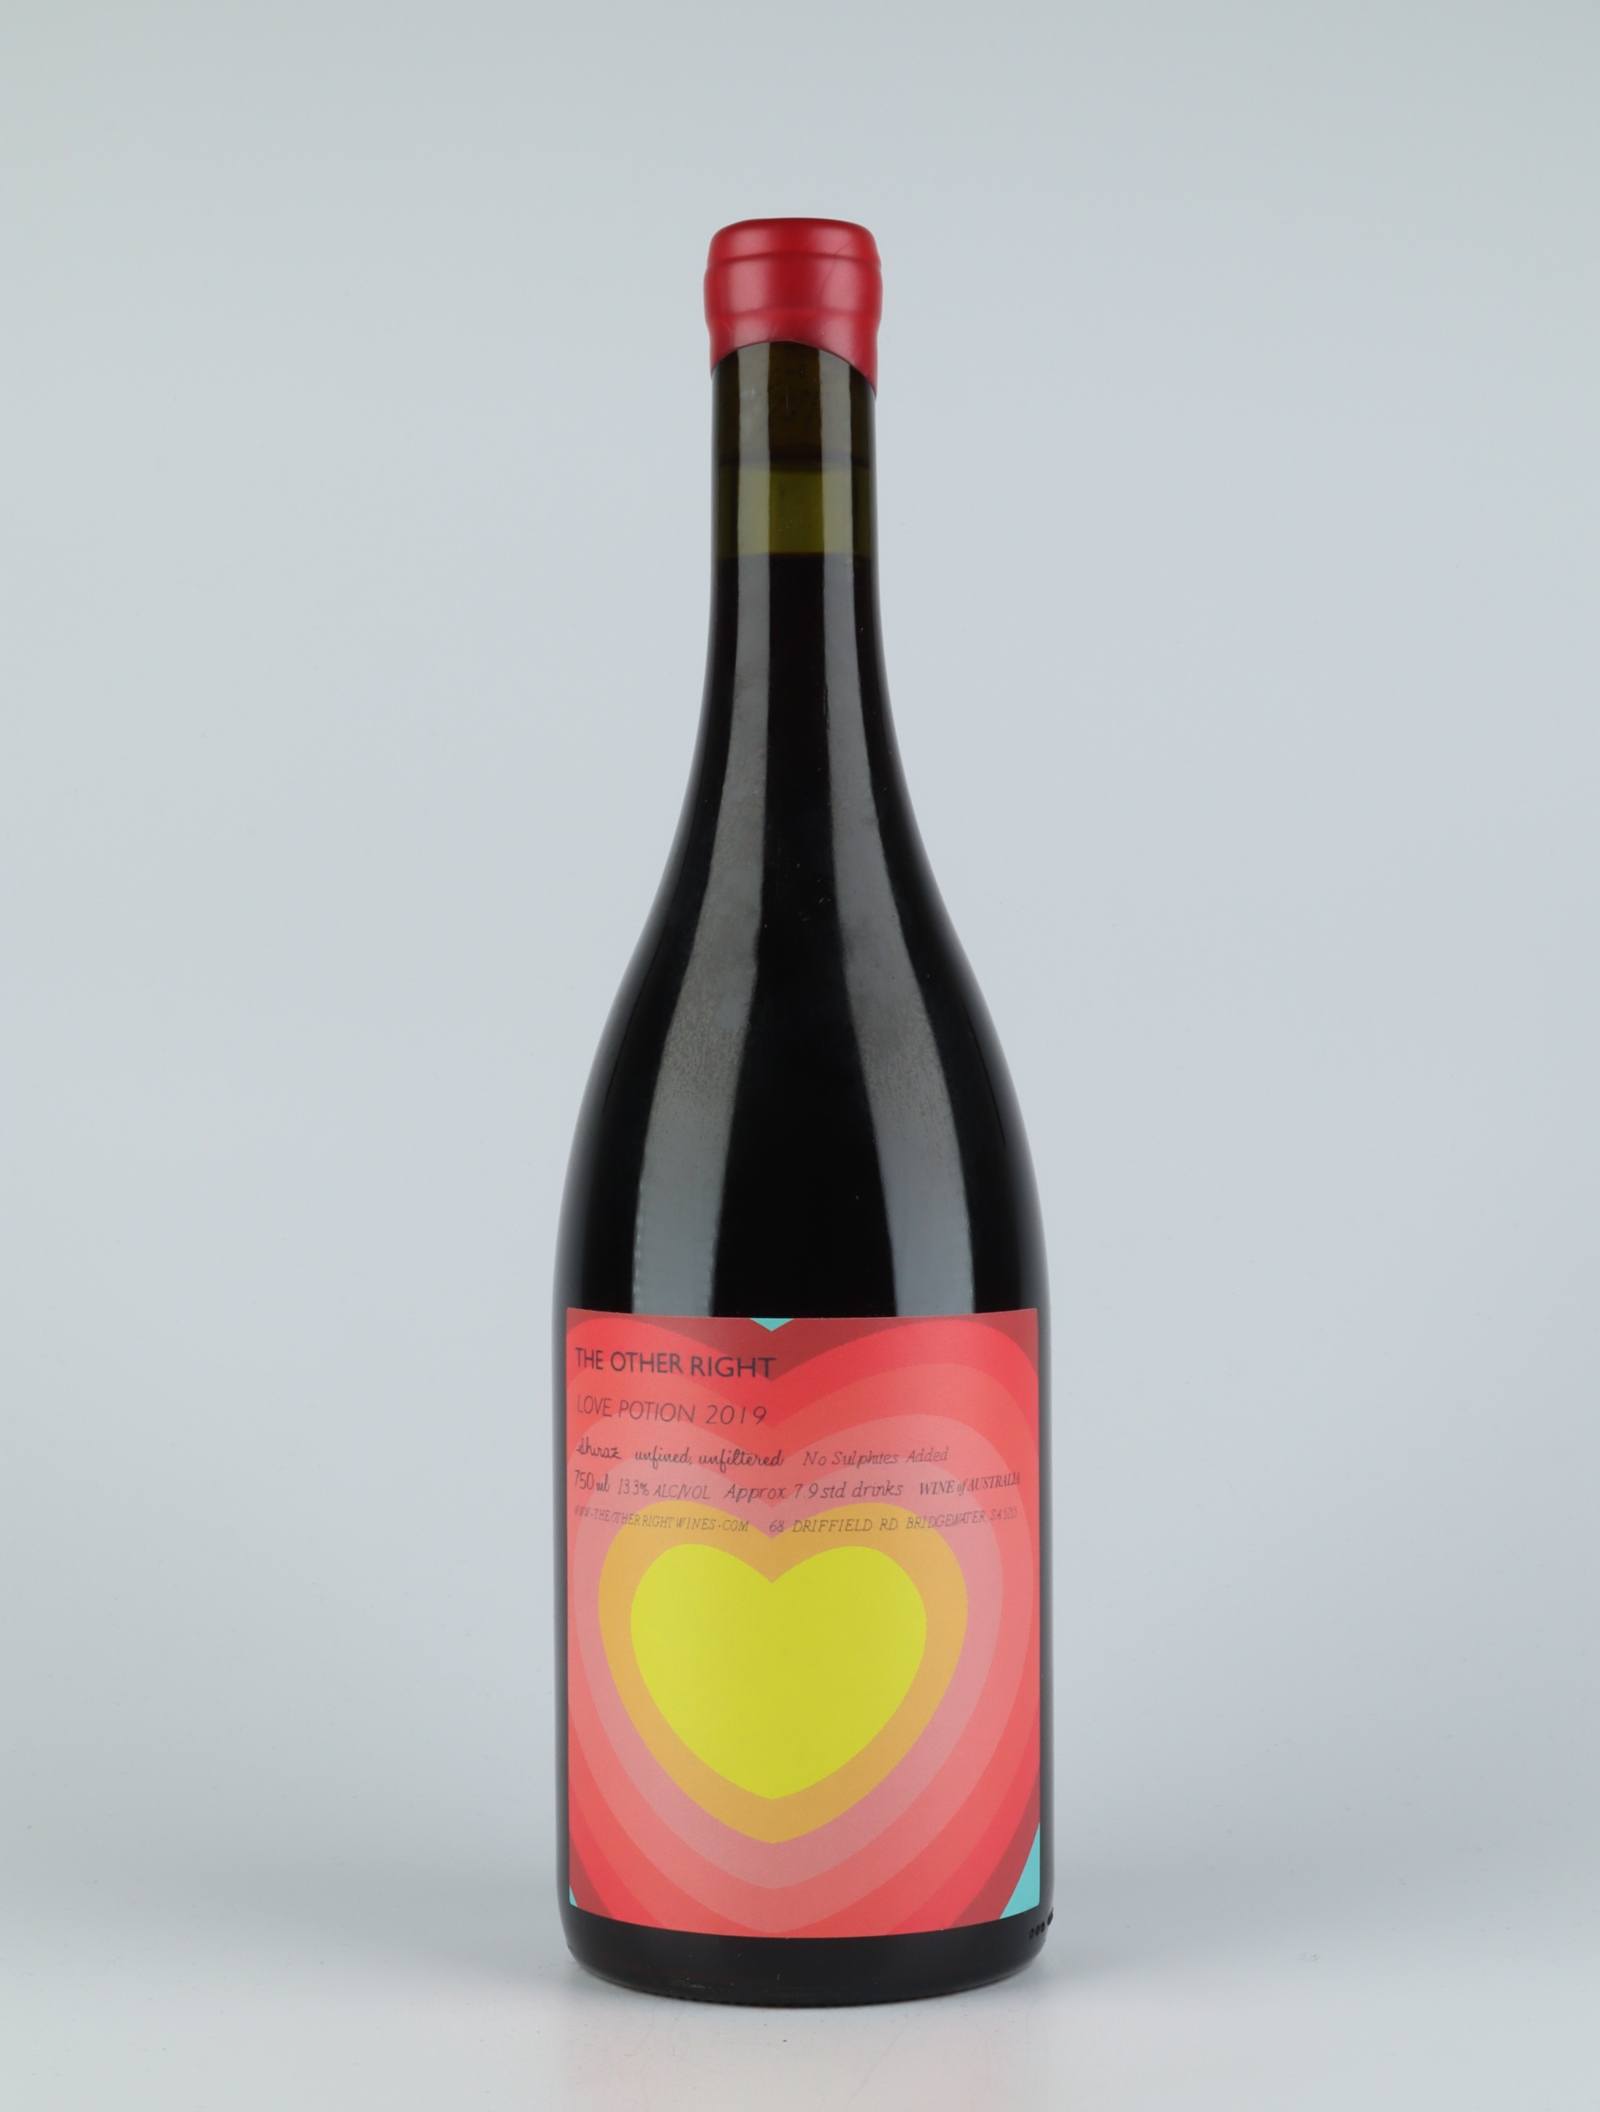 A bottle 2019 Love Potion Red wine from The Other Right, Adelaide Hills in Australia